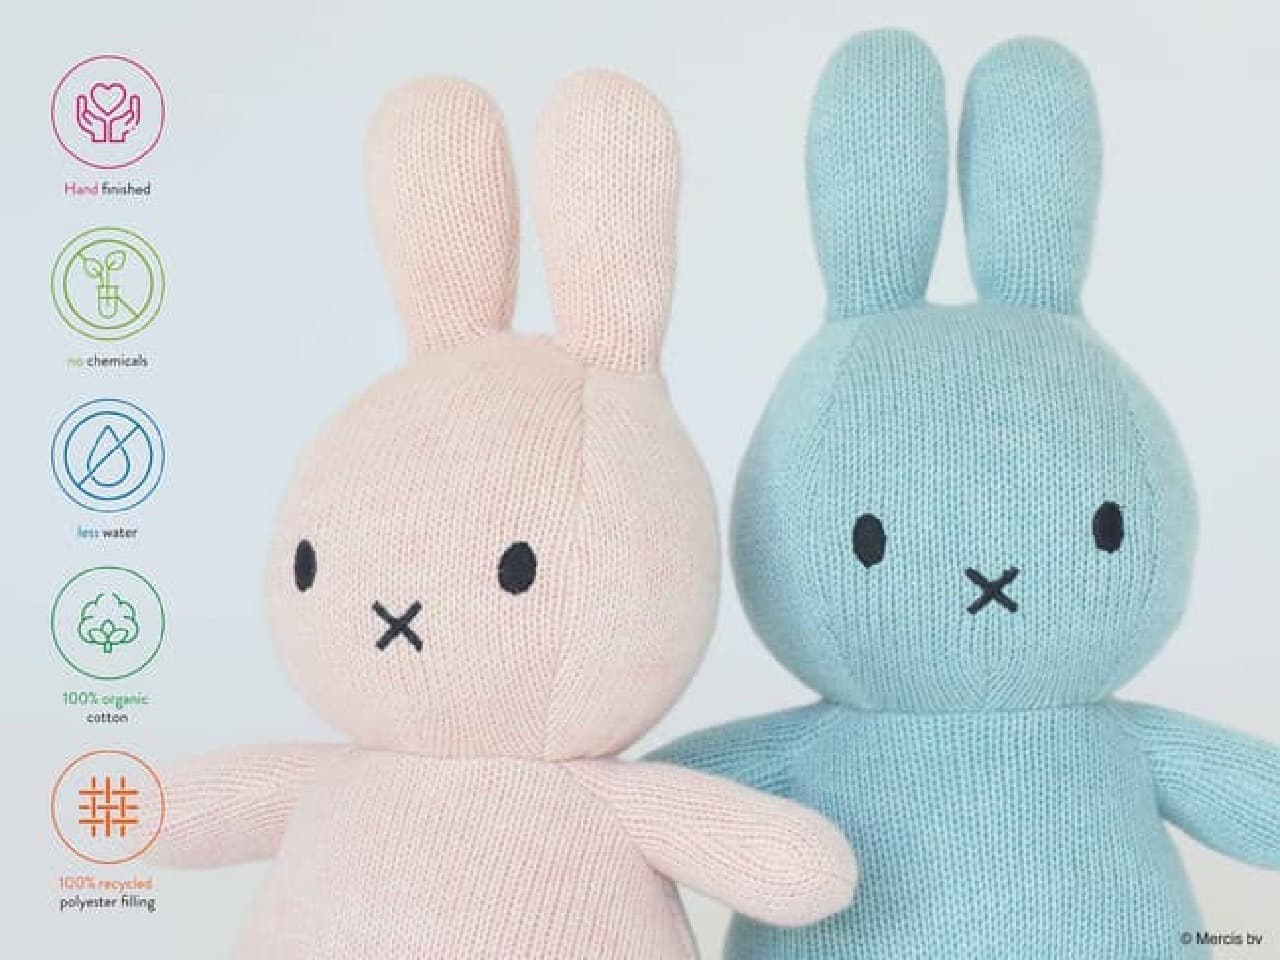 Two New Colors for the Miffy Plushie "Organic Cotton Collection" -- Soft Pink and Ocean Blue for Spring and Summer